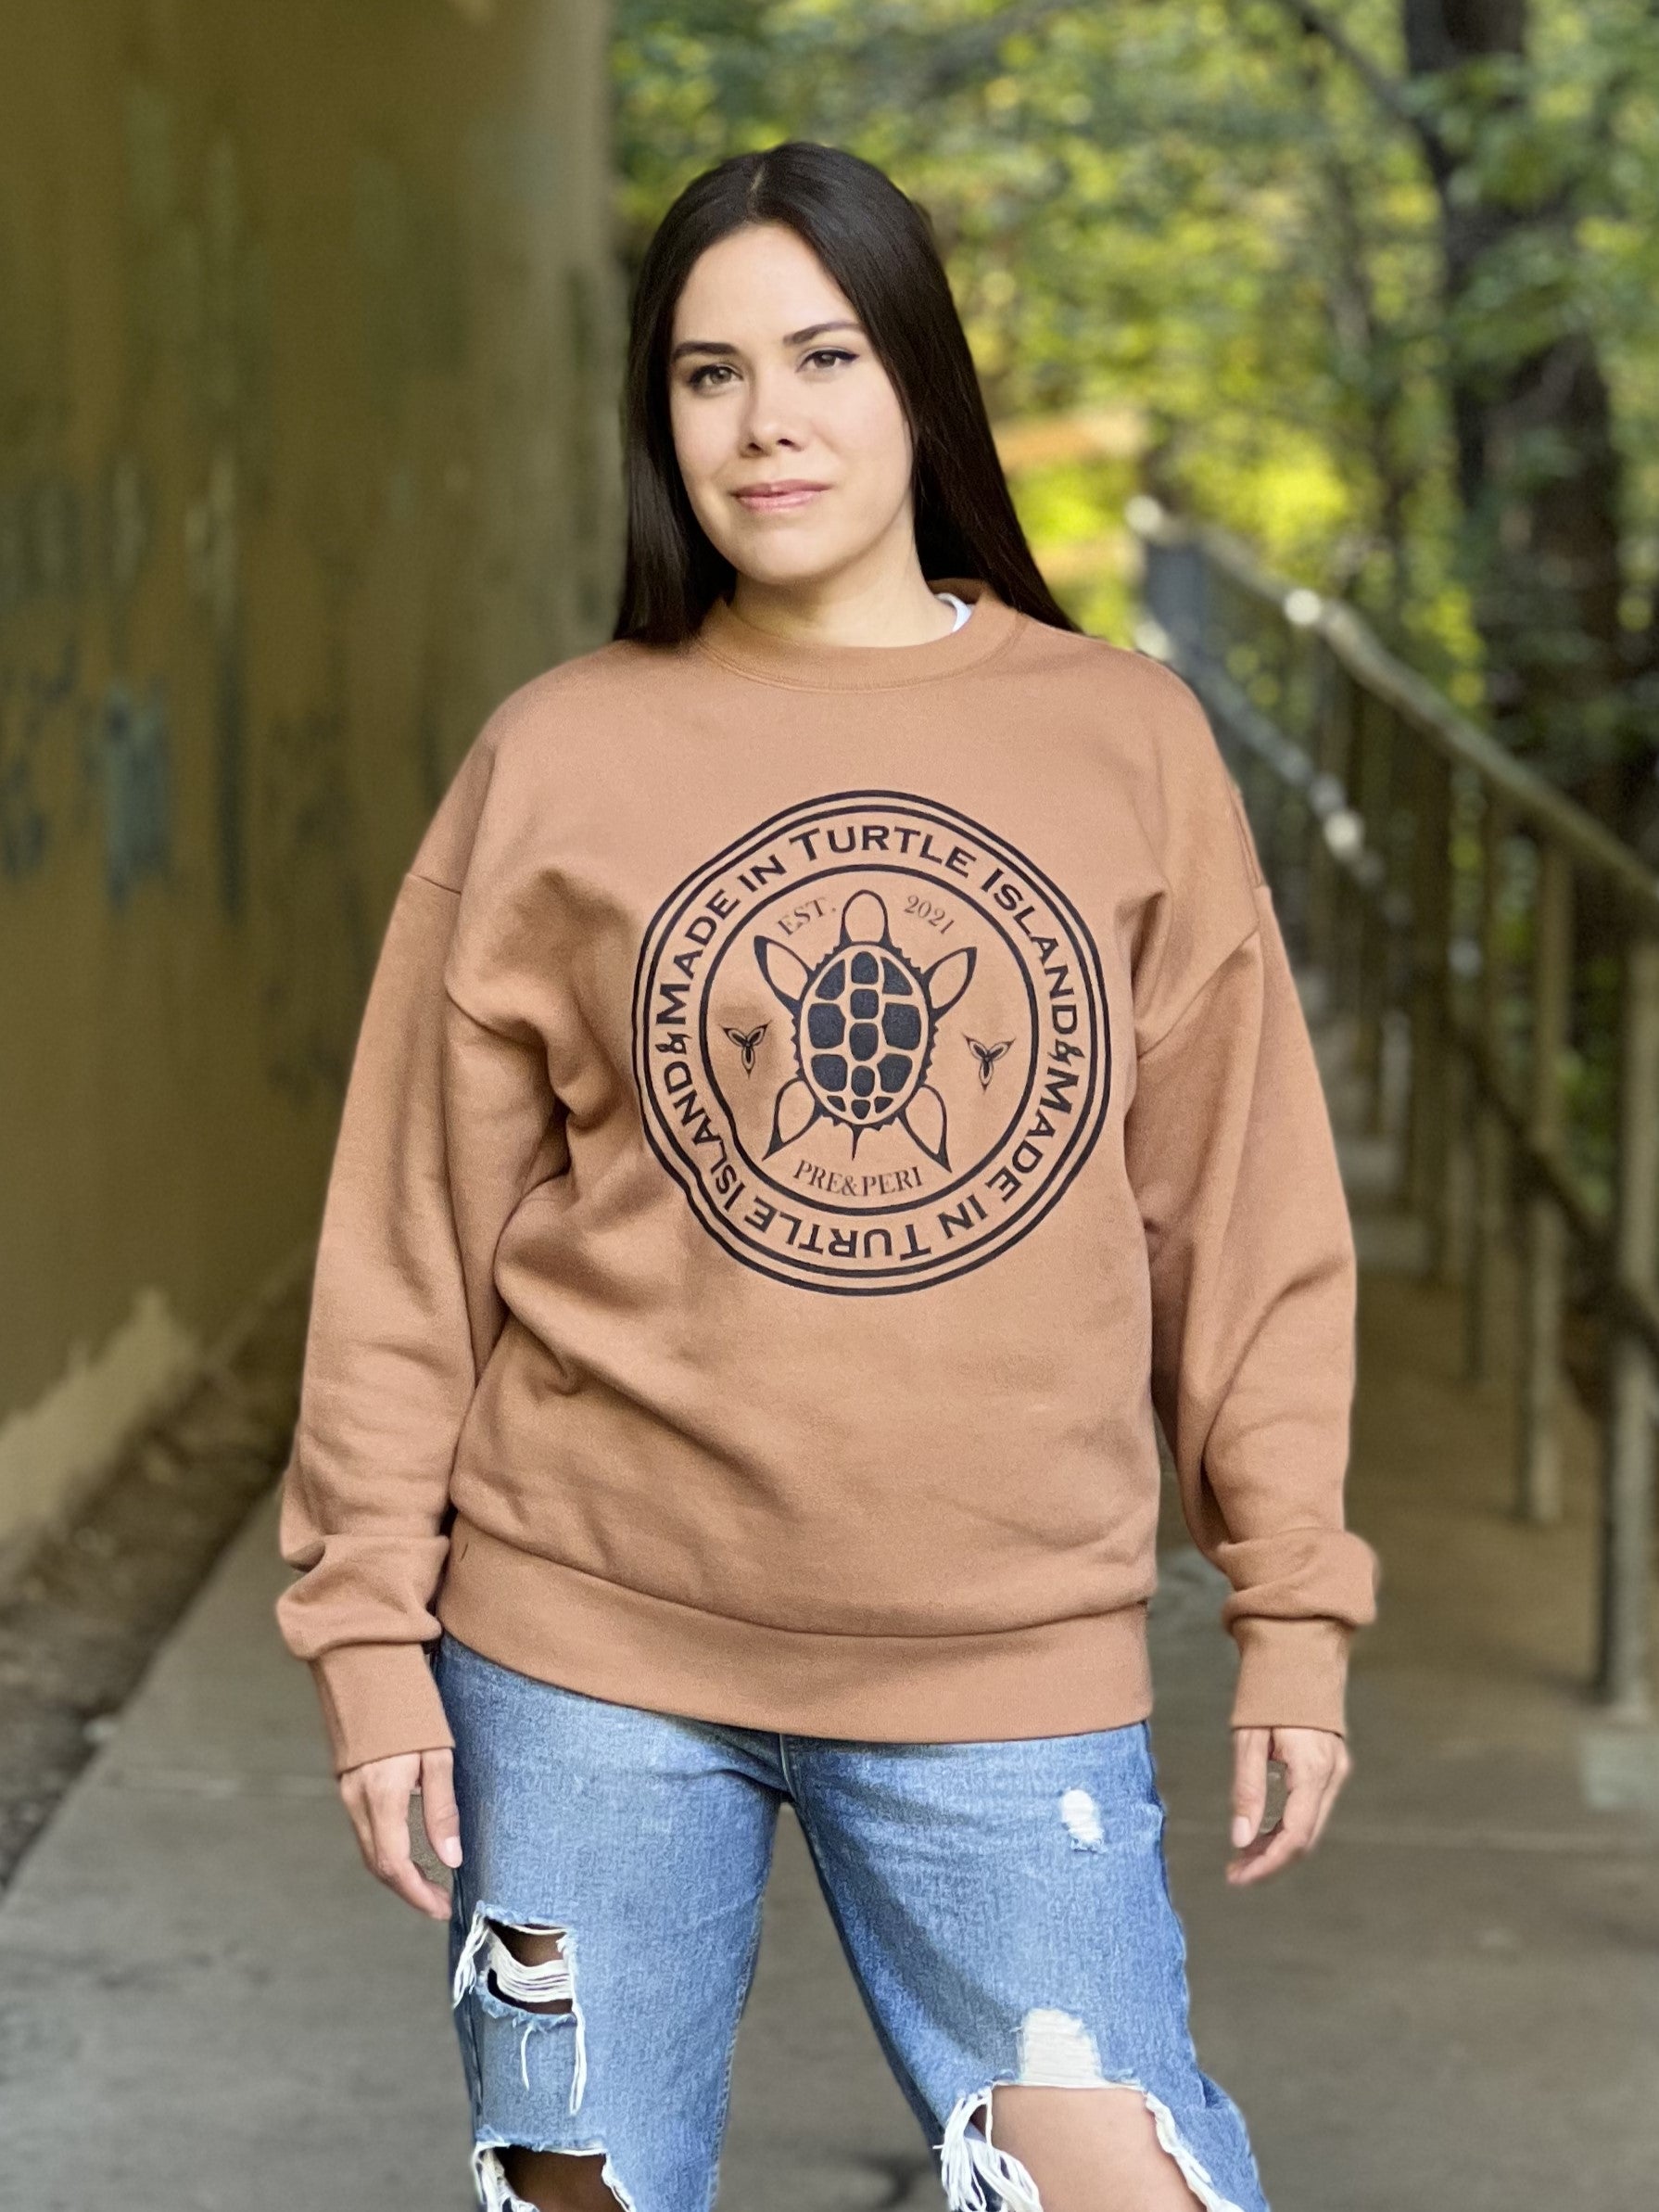 A woman wearing a camel-colour oversized crewneck sweatshirt with a black print depicting a stylized turtles flanked by two trilliums all in a circle with the words "Made in Turtle Island" in a circle